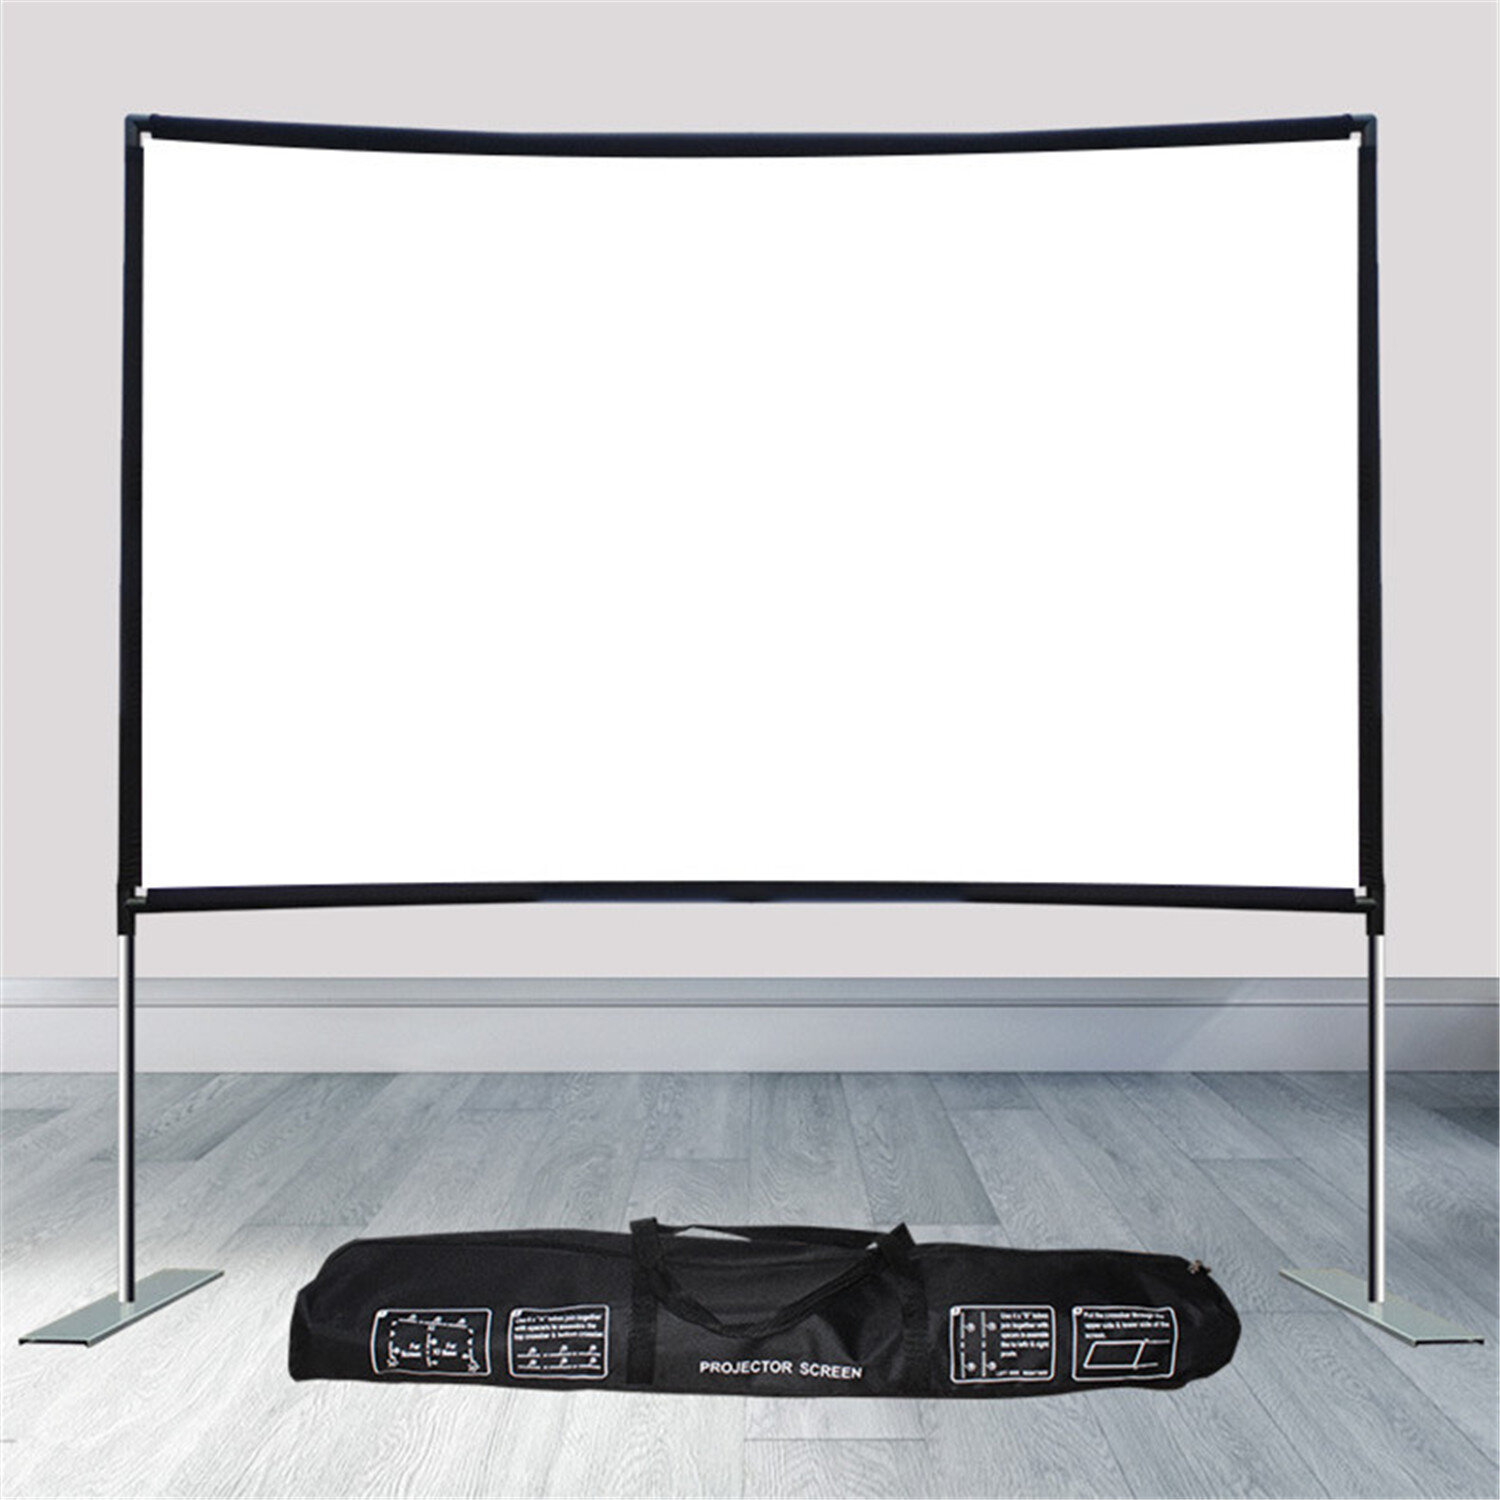 3 Indoor & Outdoor Pull Down Projection Screen with Solid Connecting Knob & Tripod Stand ELEPHAS Portable 100 Inch 4 1.1 Gain, Wrinkle-Free Projector Screen with Stand